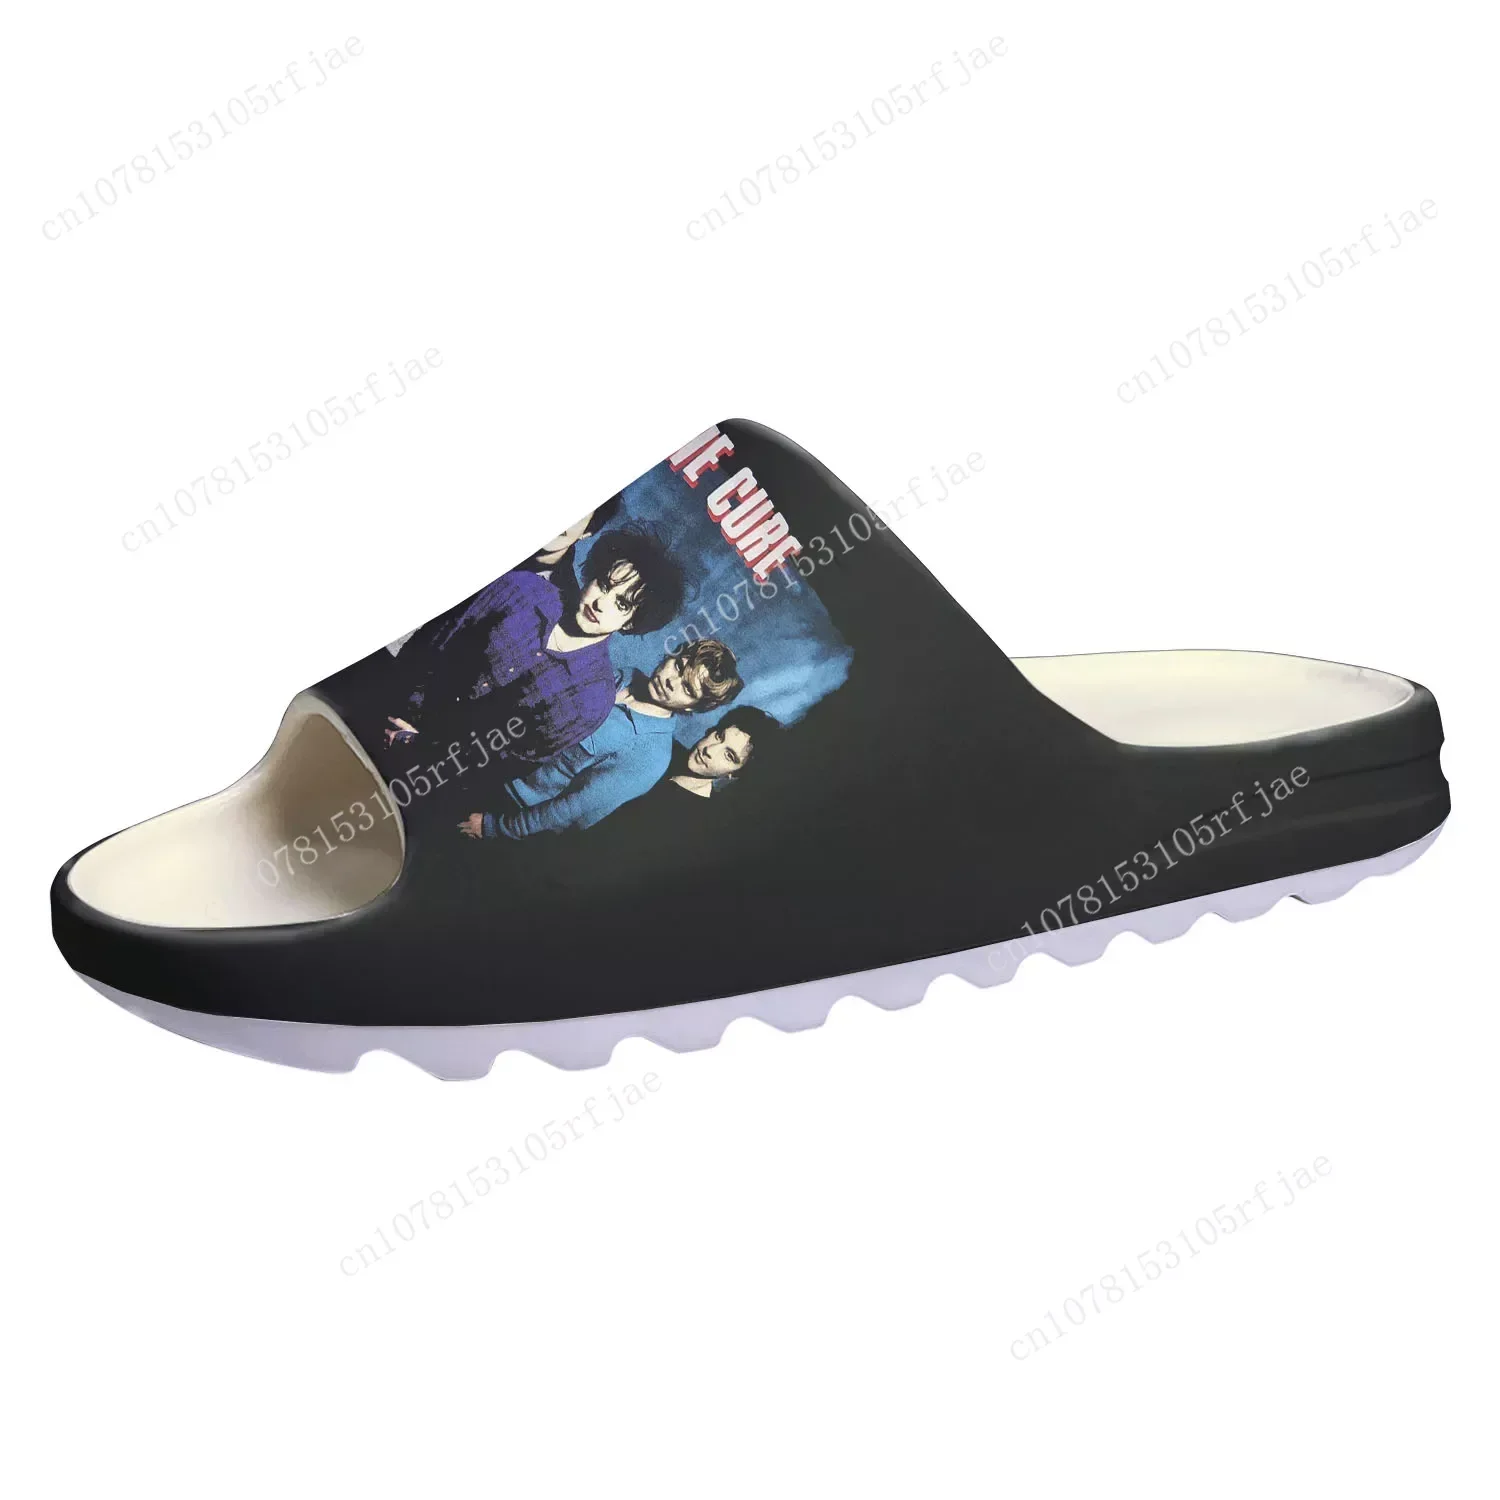 

The Cure Rock Band Soft Sole Sllipers Home Clogs Step on Water Shoes Mens Womens Teenager Robert Smith Customize on Shit Sandals